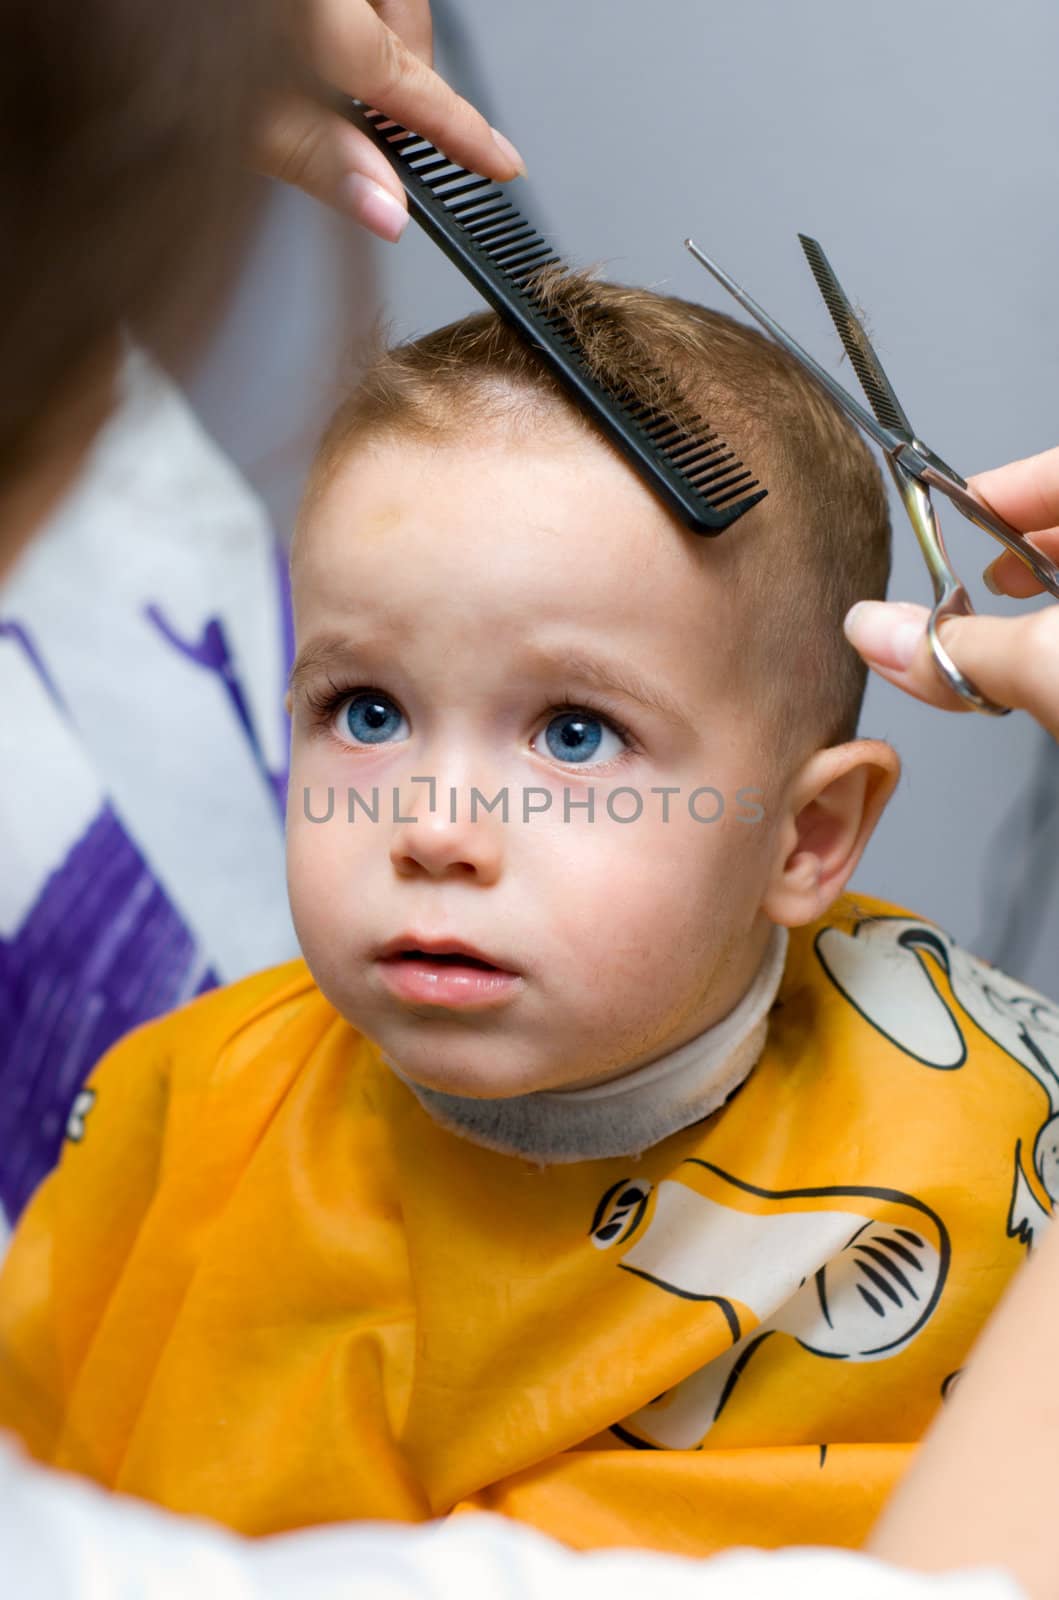 Haircutting one year old boy in the hairdressing saloon